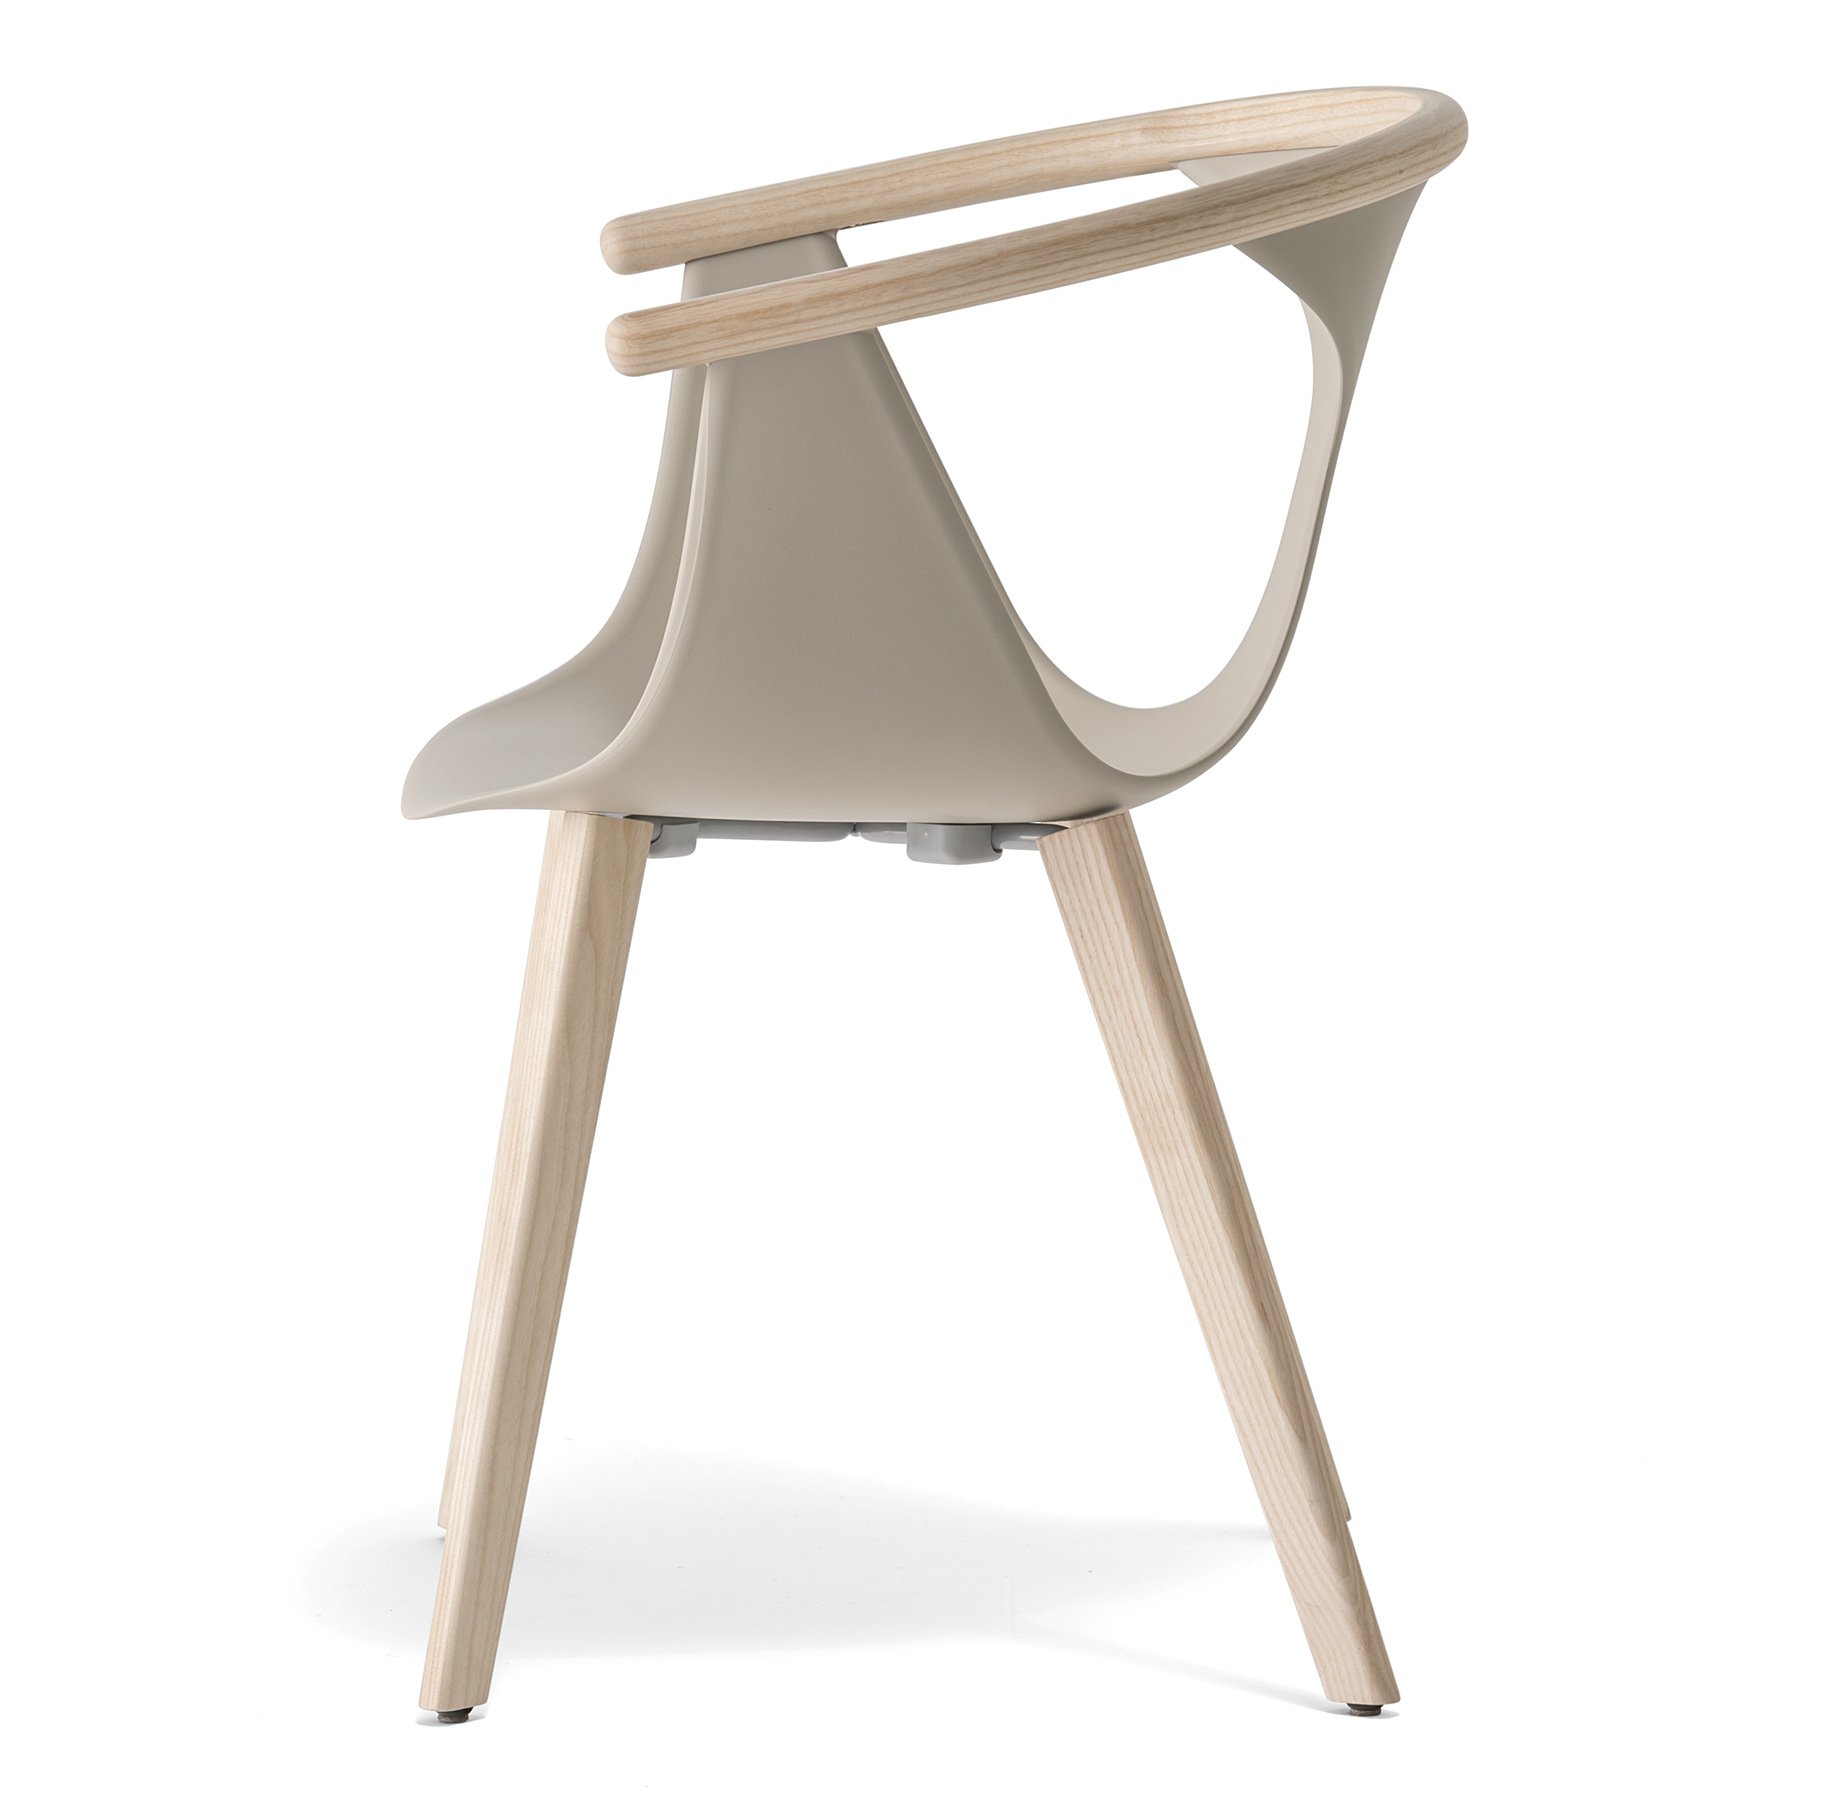 Fox 3725 chair from Pedrali, designed by Patrick Norguet